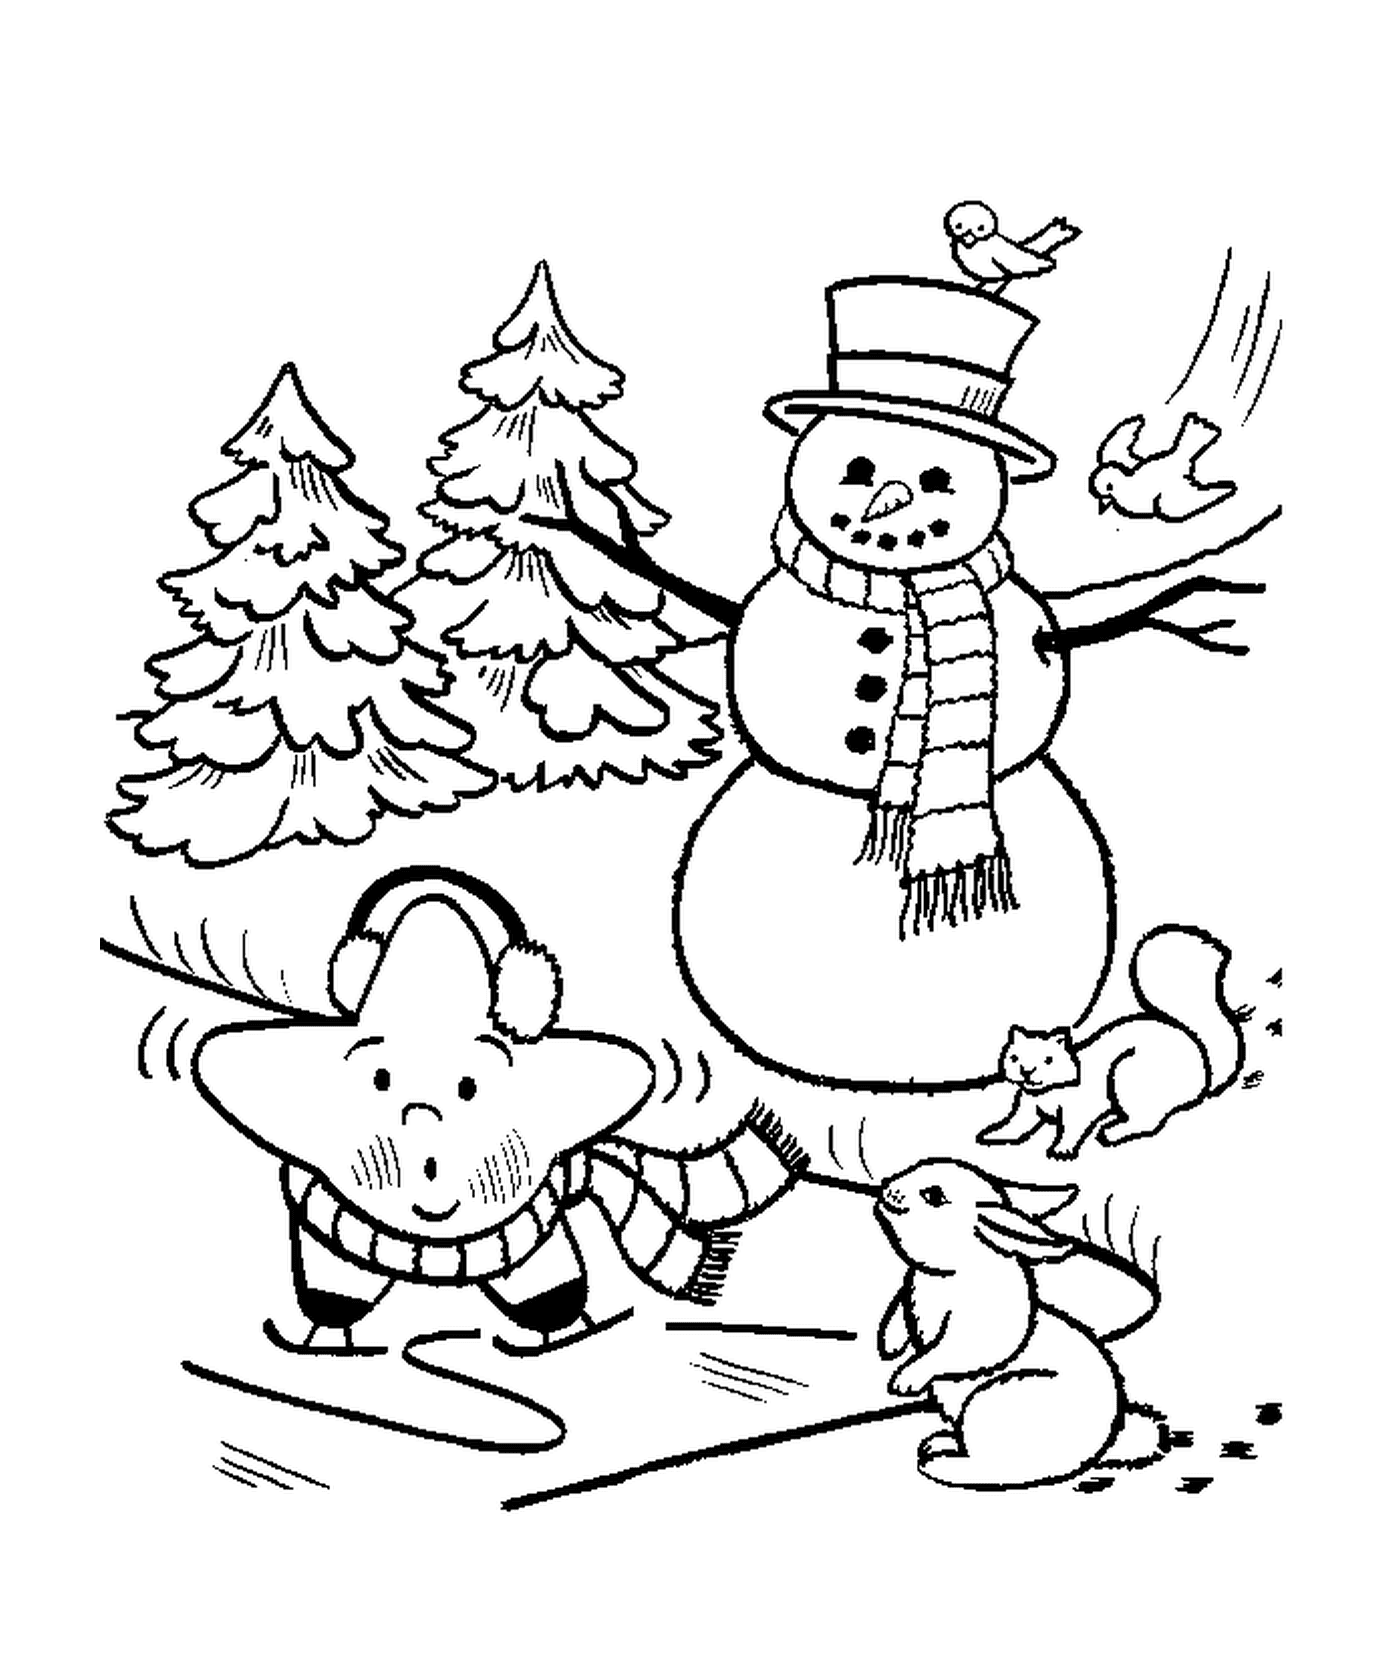  Snowman, squirrel and star 